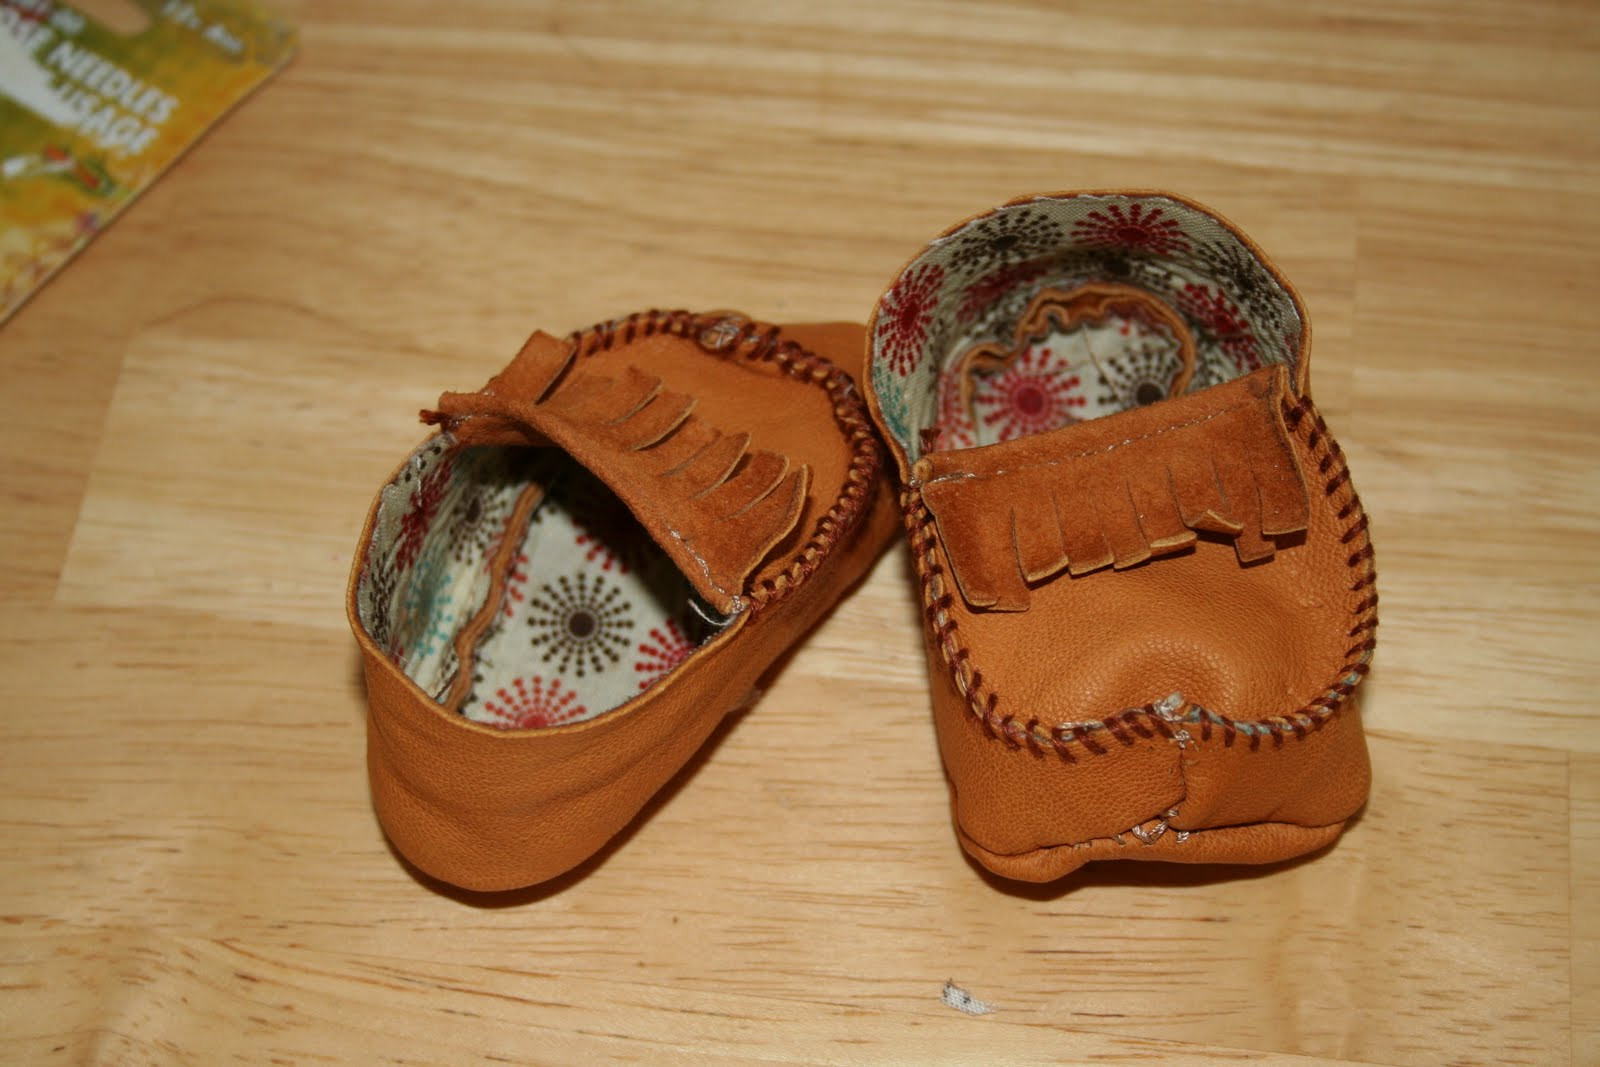 DIY Baby Moccasins
 The Mommy Dialogues DIY baby moccasins